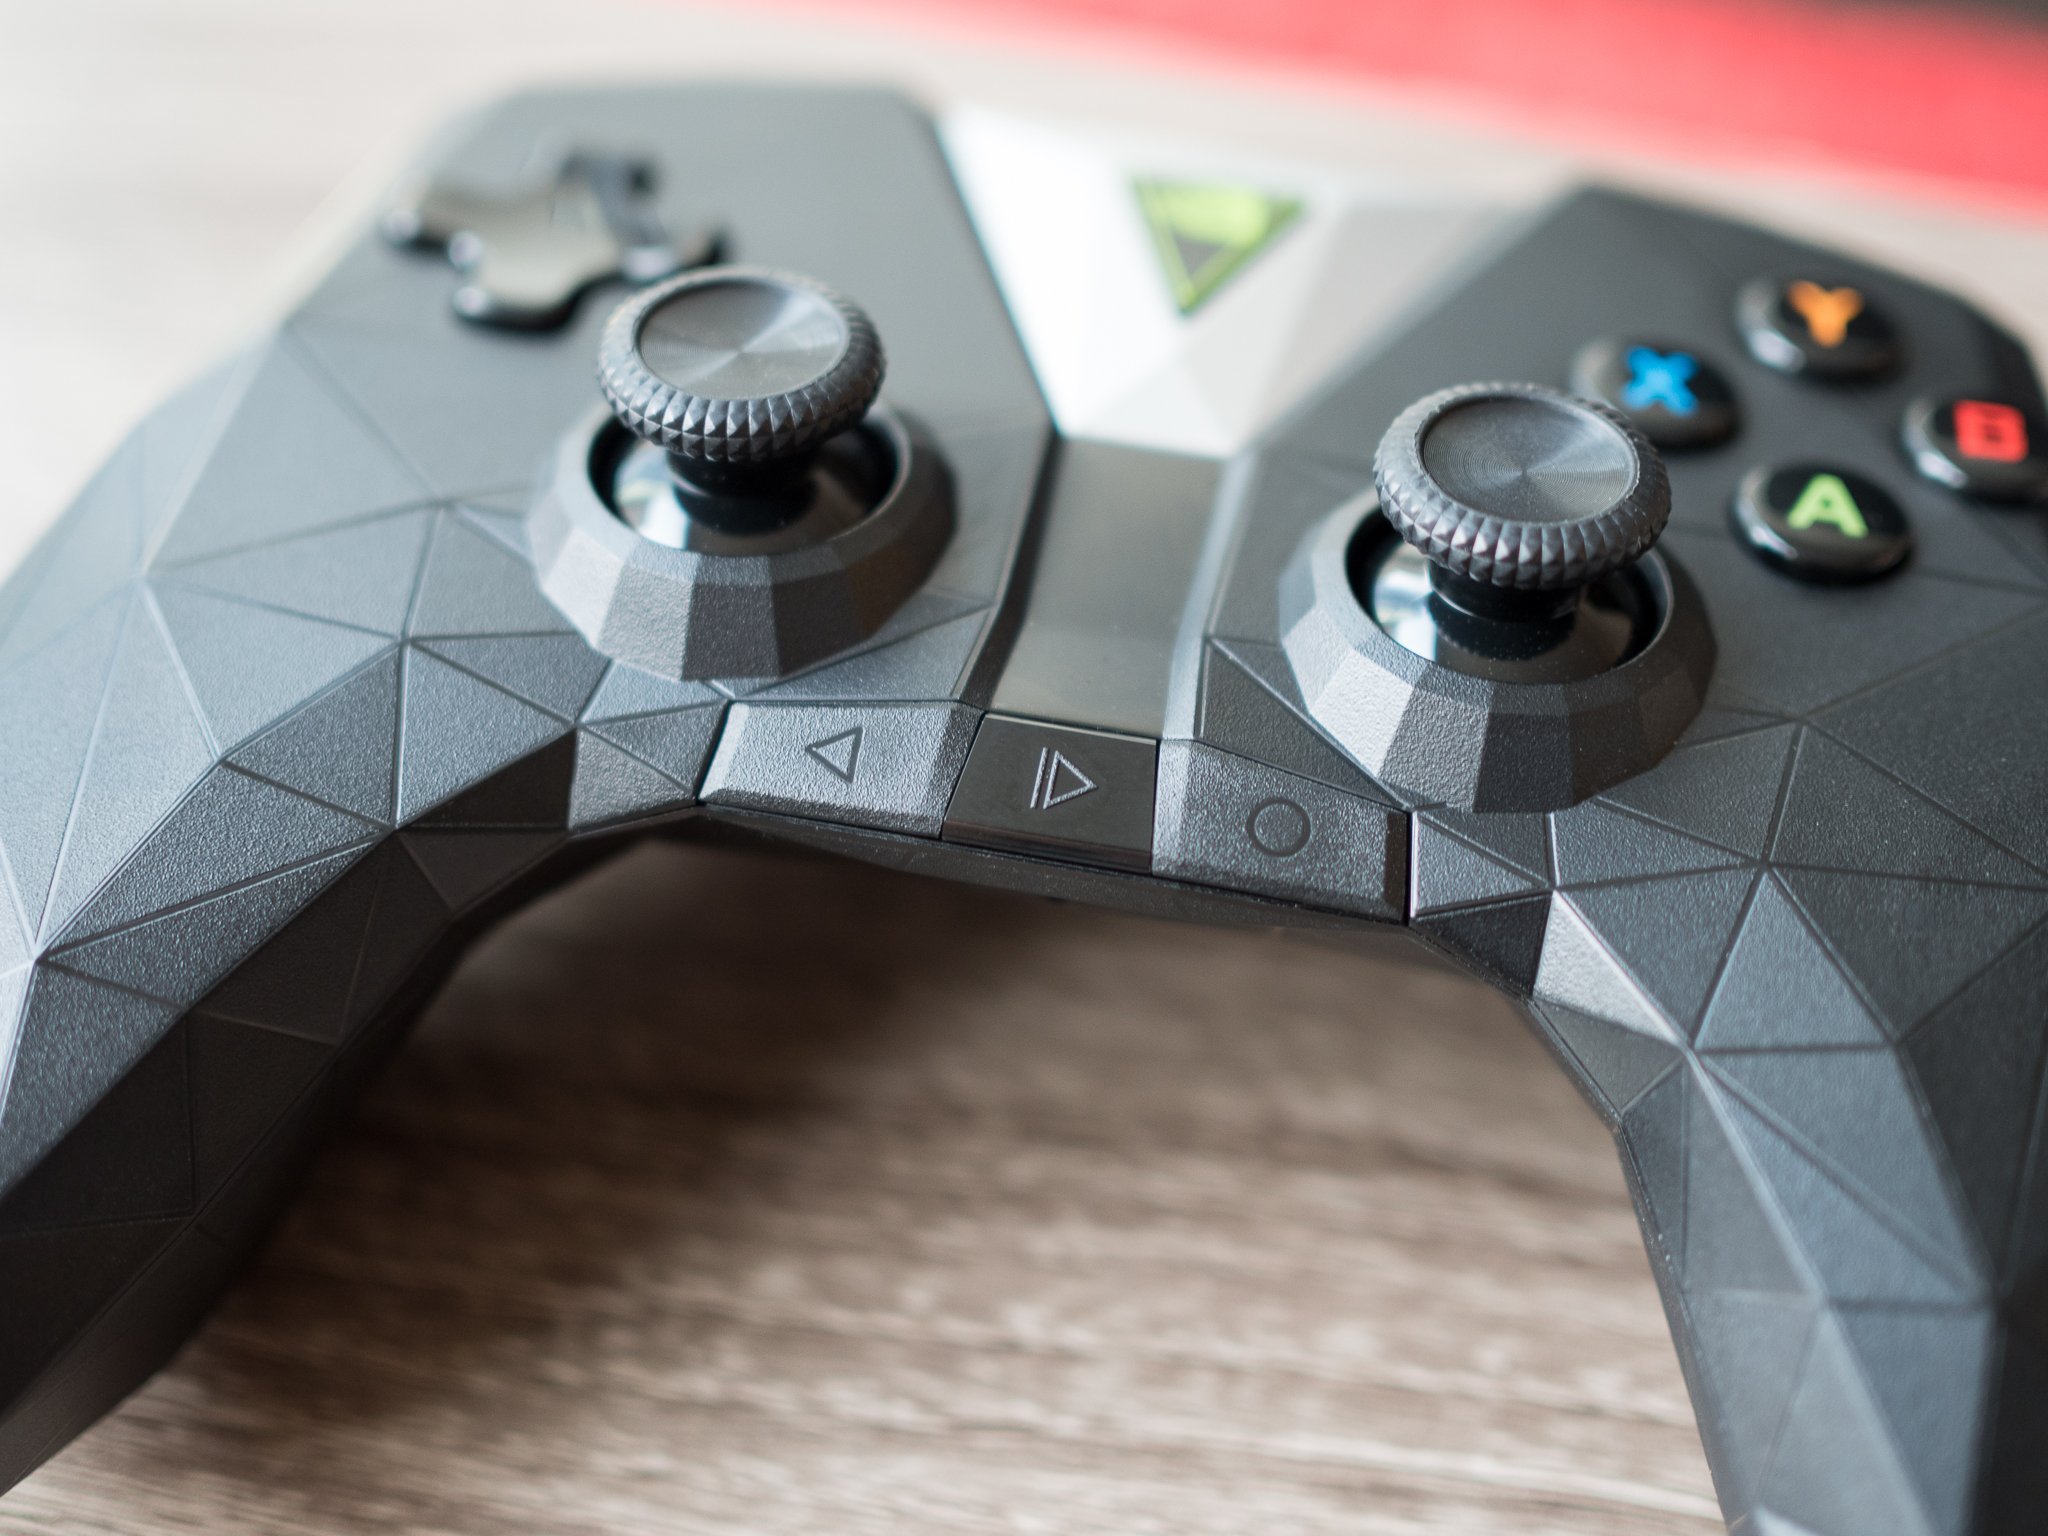 What Controllers Are Compatible With The Nvidia Shield Tv Pro 2019 Android Central